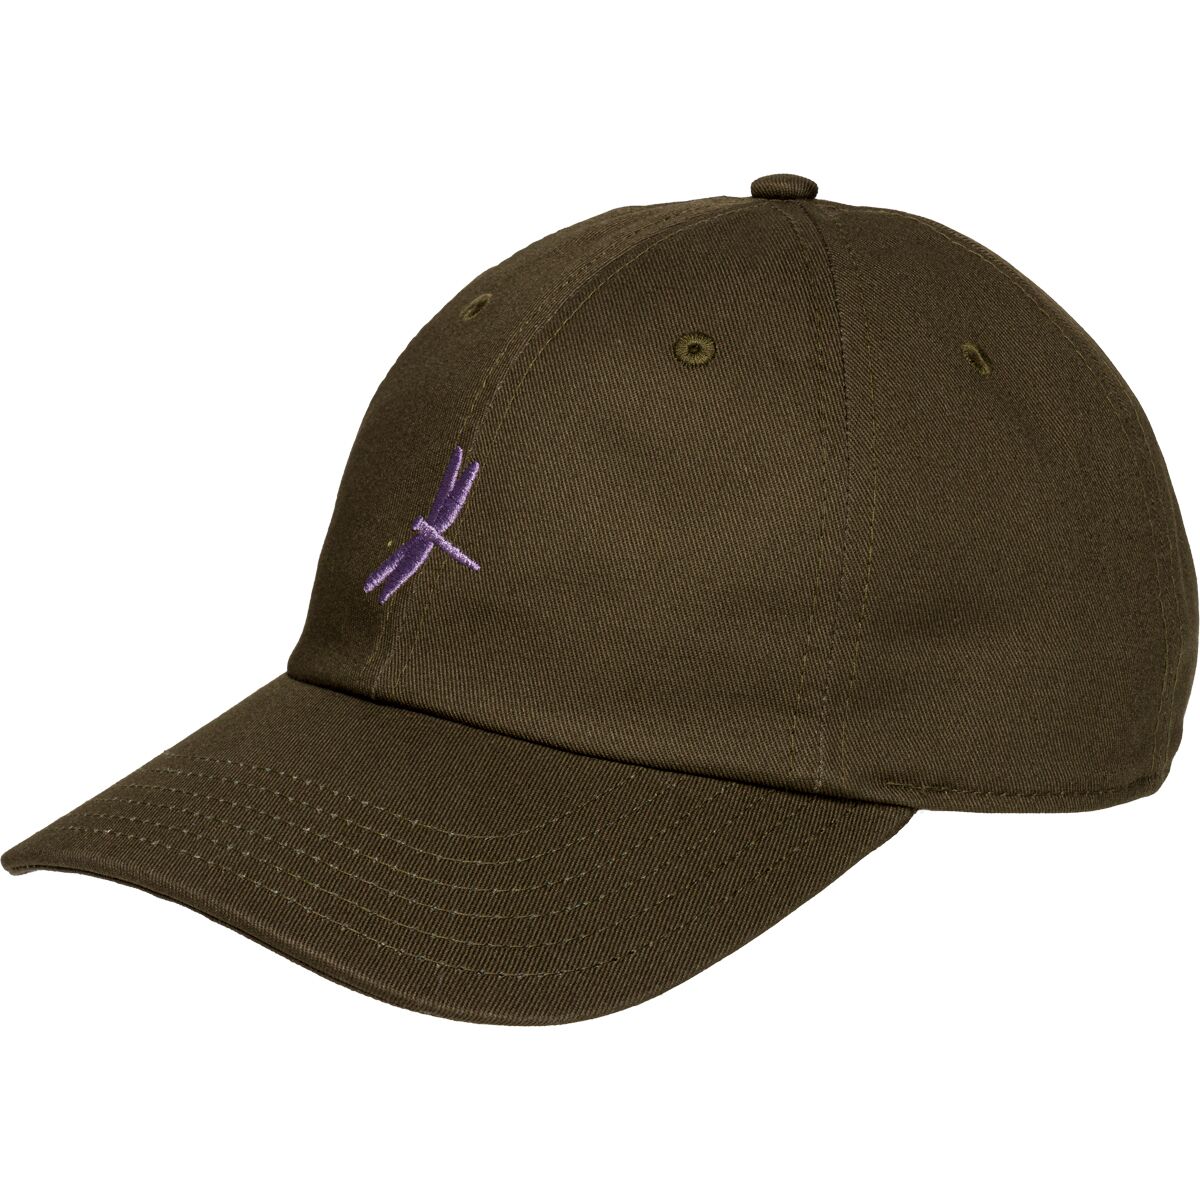 Orvis Dragonfly Embroidery Hat - Women's